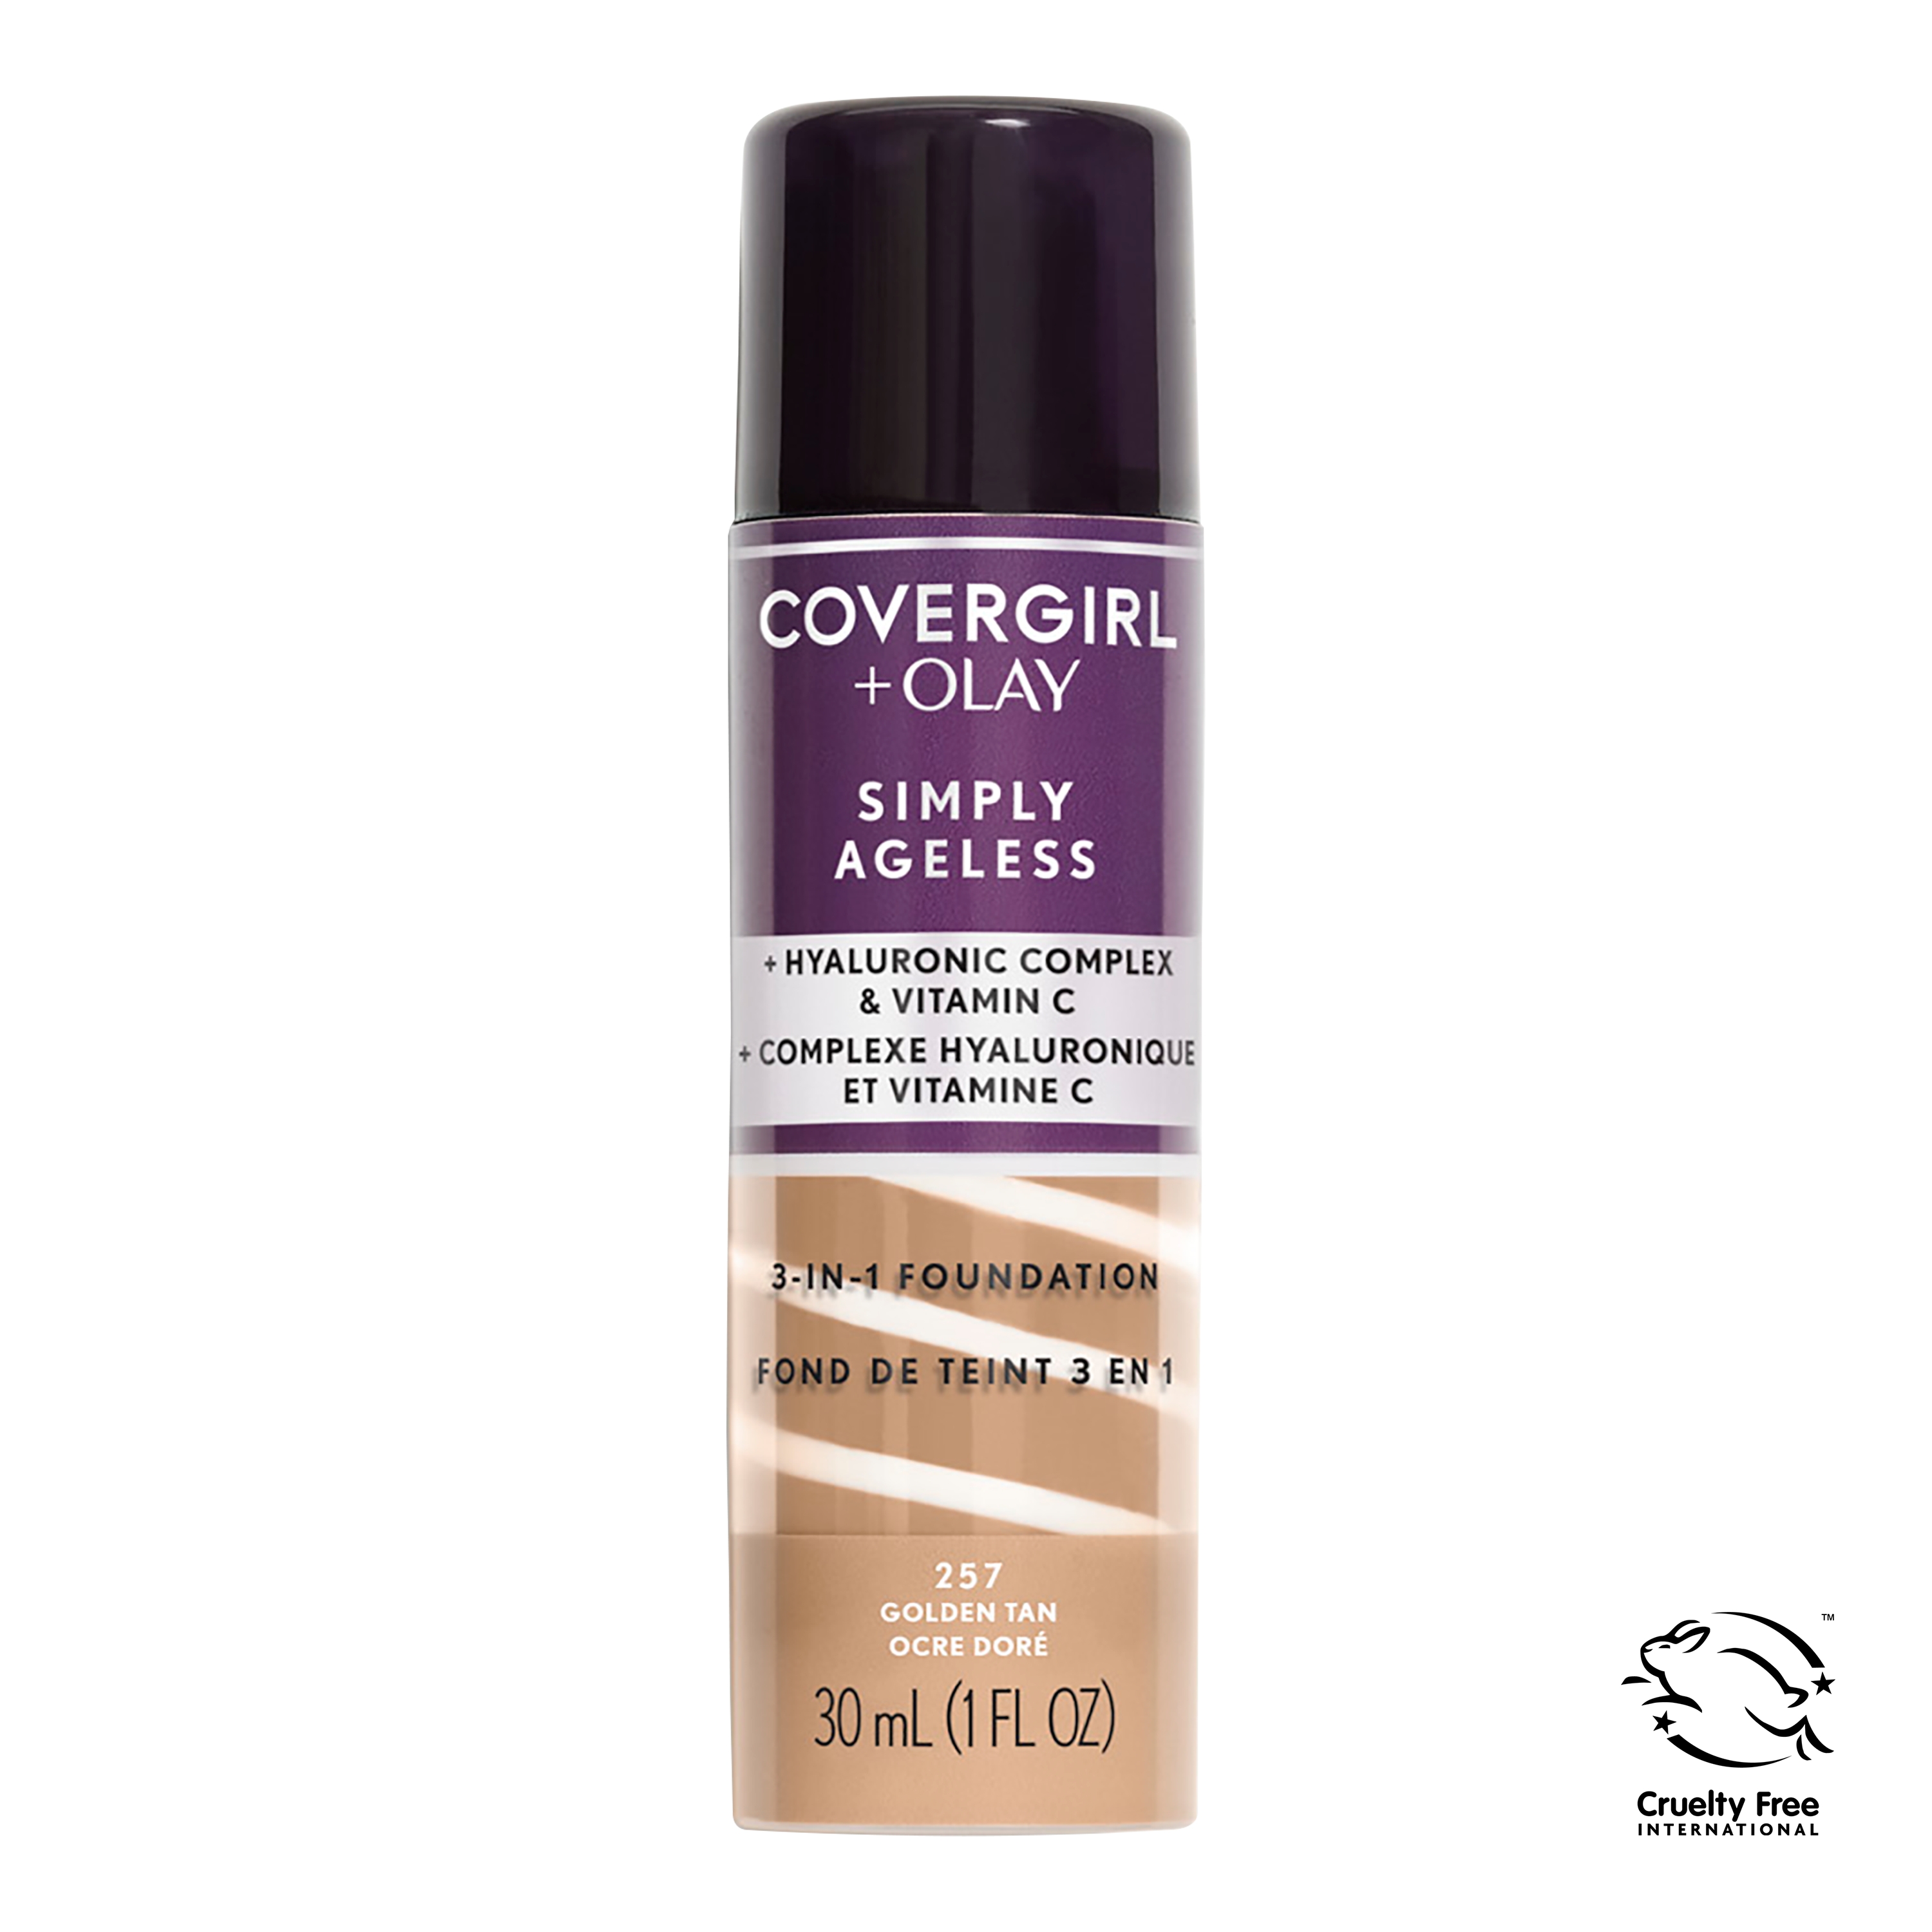 COVERGIRL + OLAY Simply Ageless 3-in-1 Liquid Foundation, 257 Golden Tan, 1 fl oz - image 1 of 14